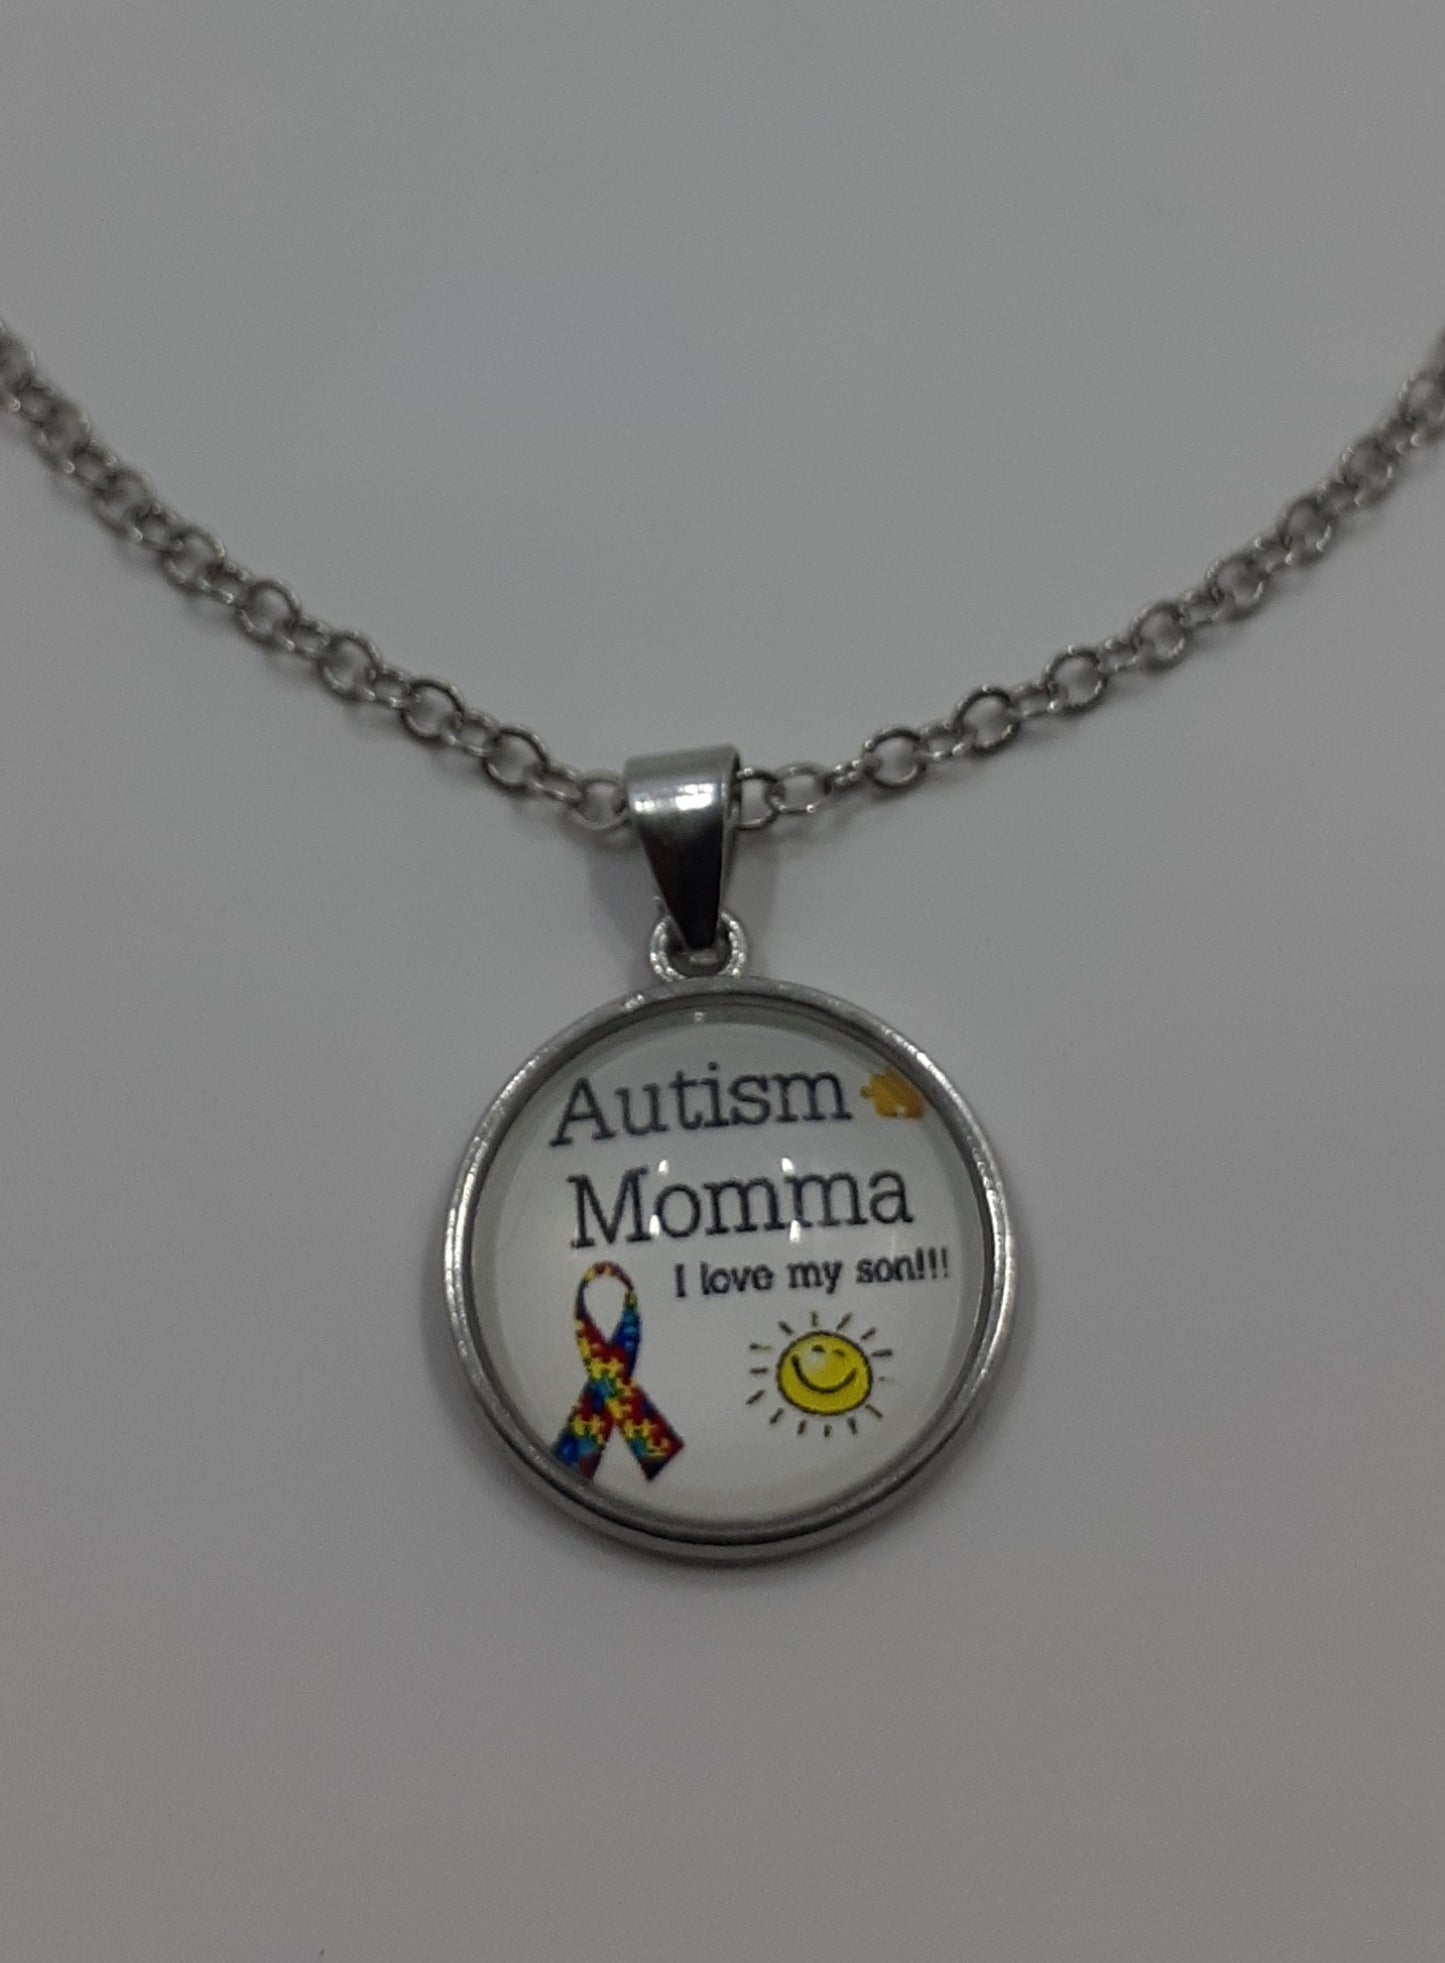 I love my son, Autism Necklace